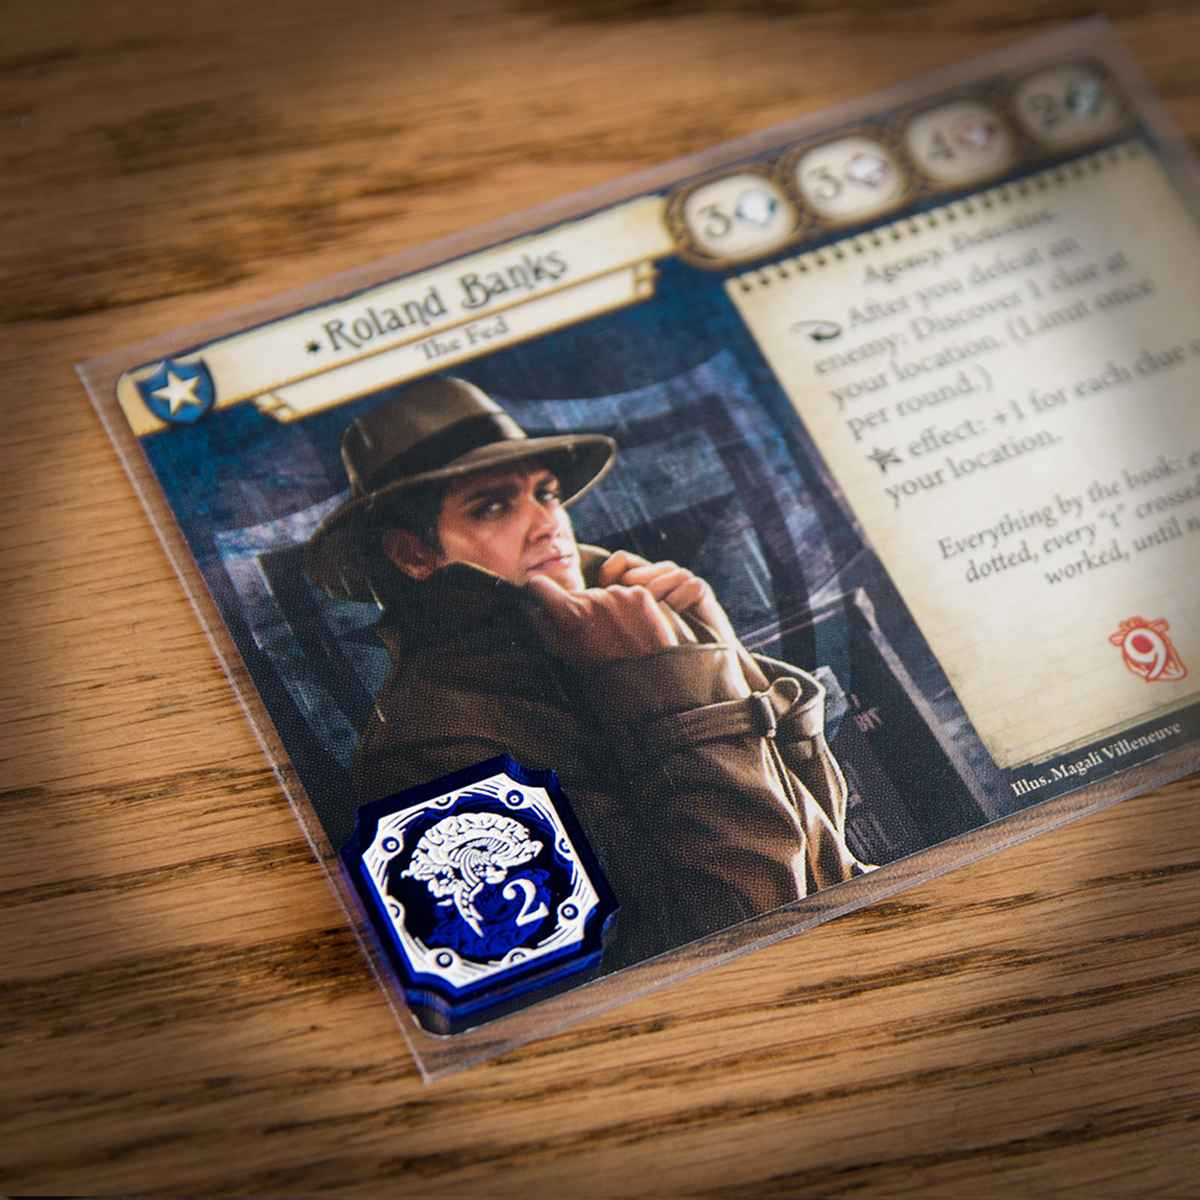 A two-value Sanity Token on top of the Arkham Horror LCG investigator, Roland Banks